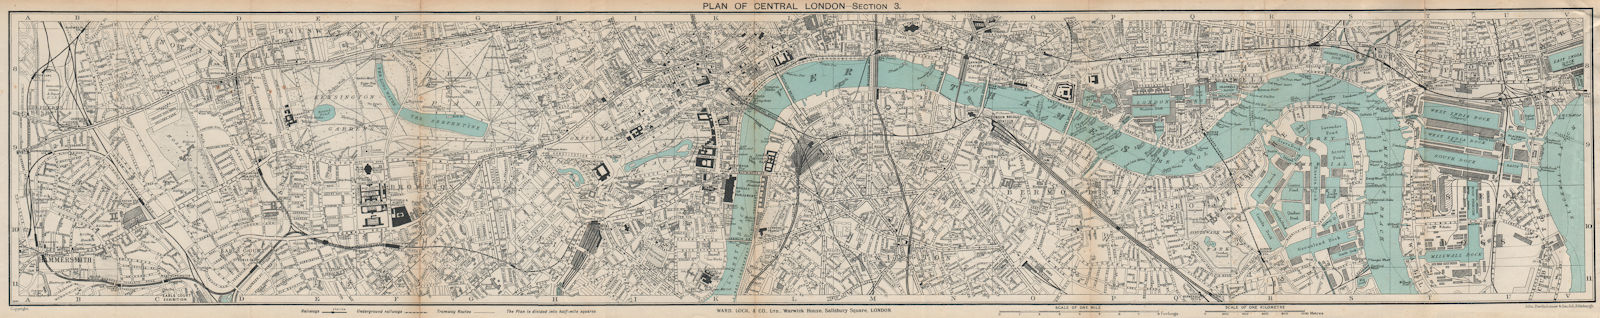 CENTRAL LONDON-SECTION 3 vintage town/city plan. London. WARD LOCK 1930 map